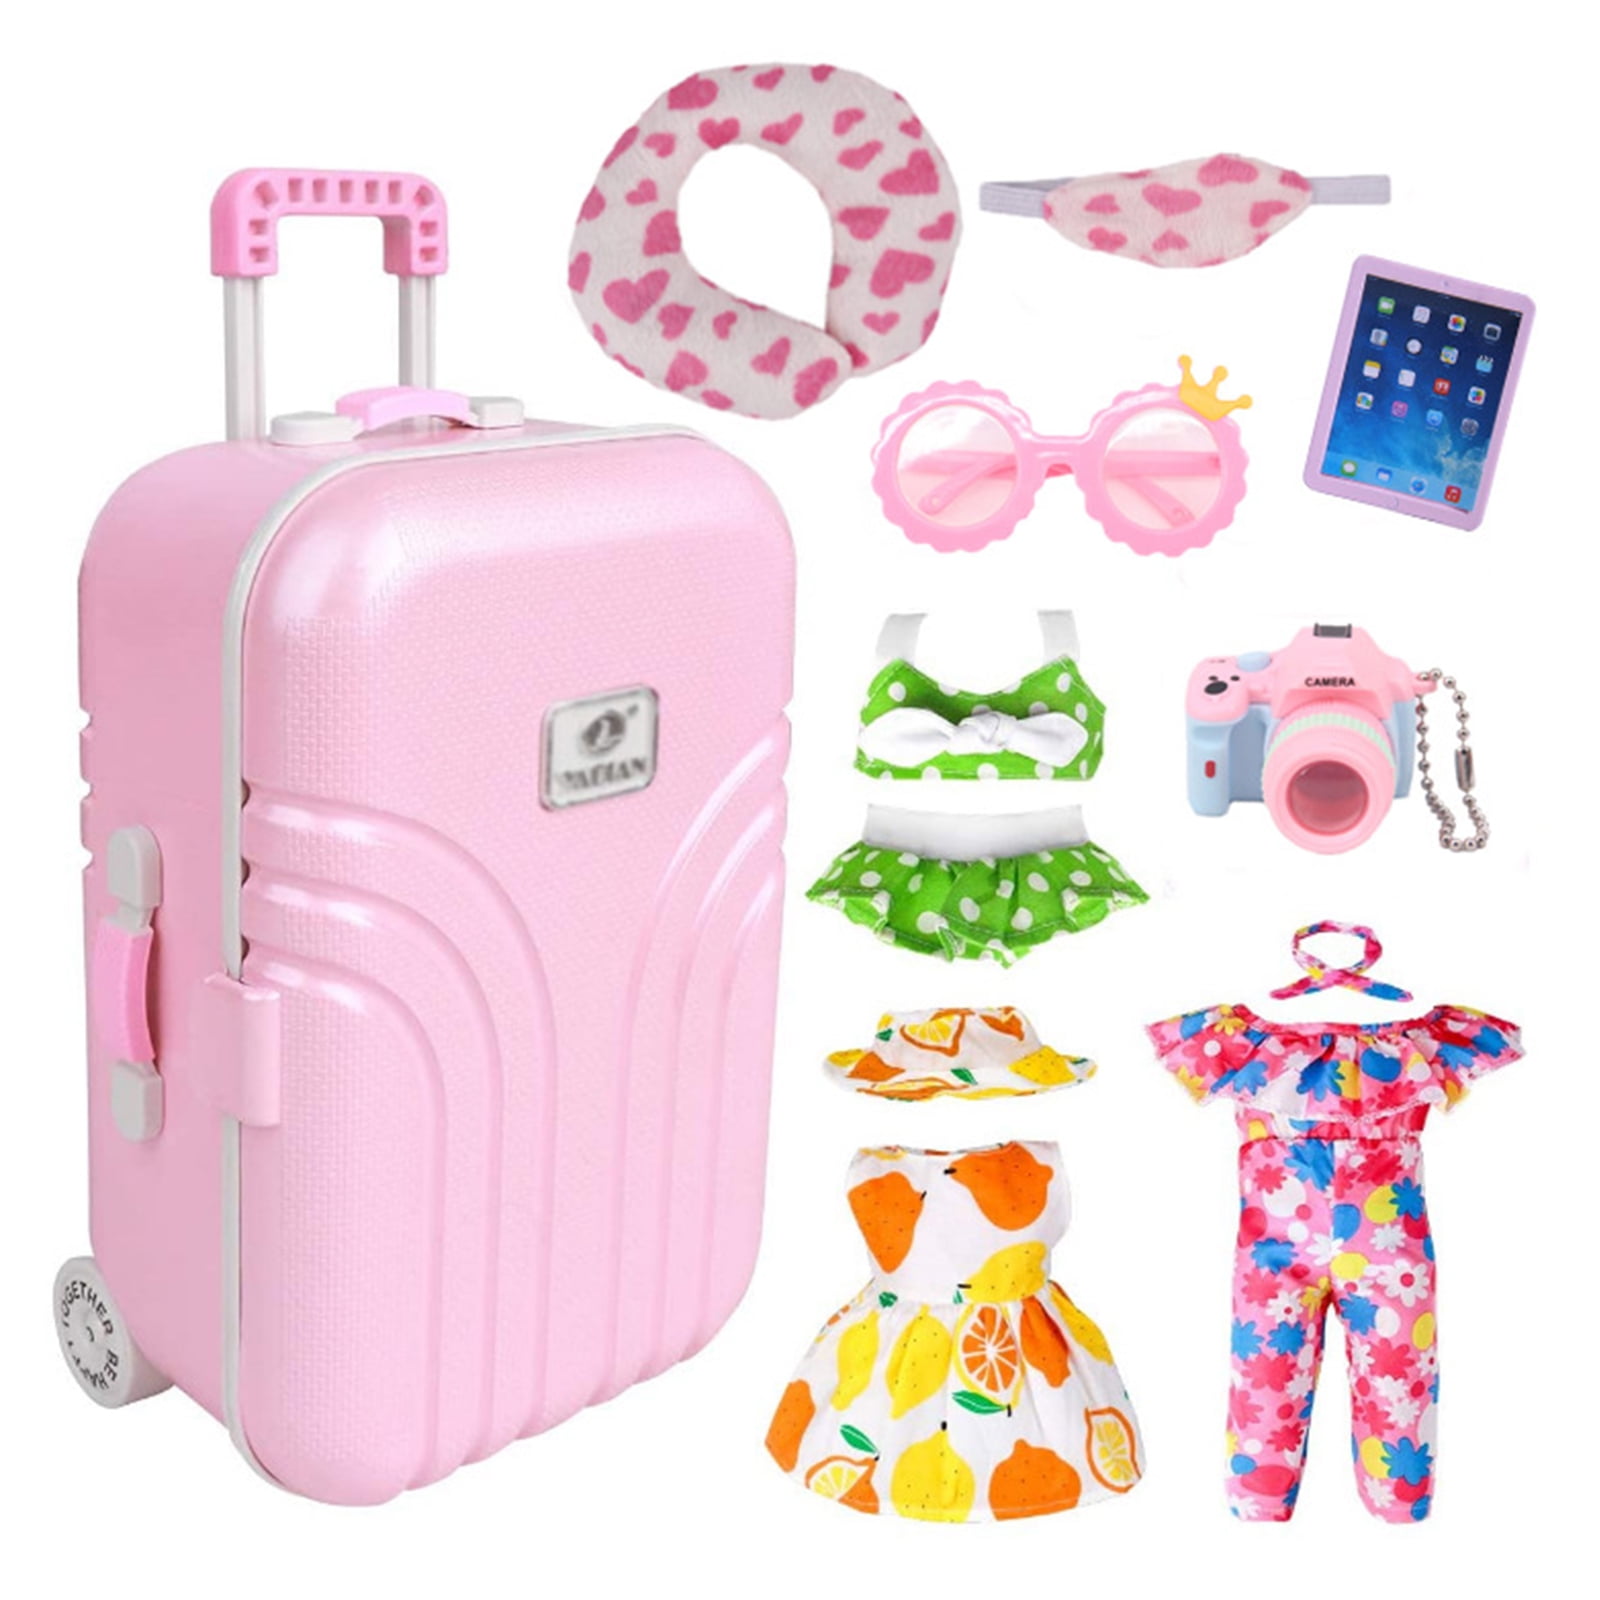 18 Doll Travel Play Set Doll Accessories with Carry on Suitcase Luggage, 3 Sets of Doll Clothes, Doll Travel Play Set Fit for American Girl Doll Accessories with Suitcase - Walmart.com